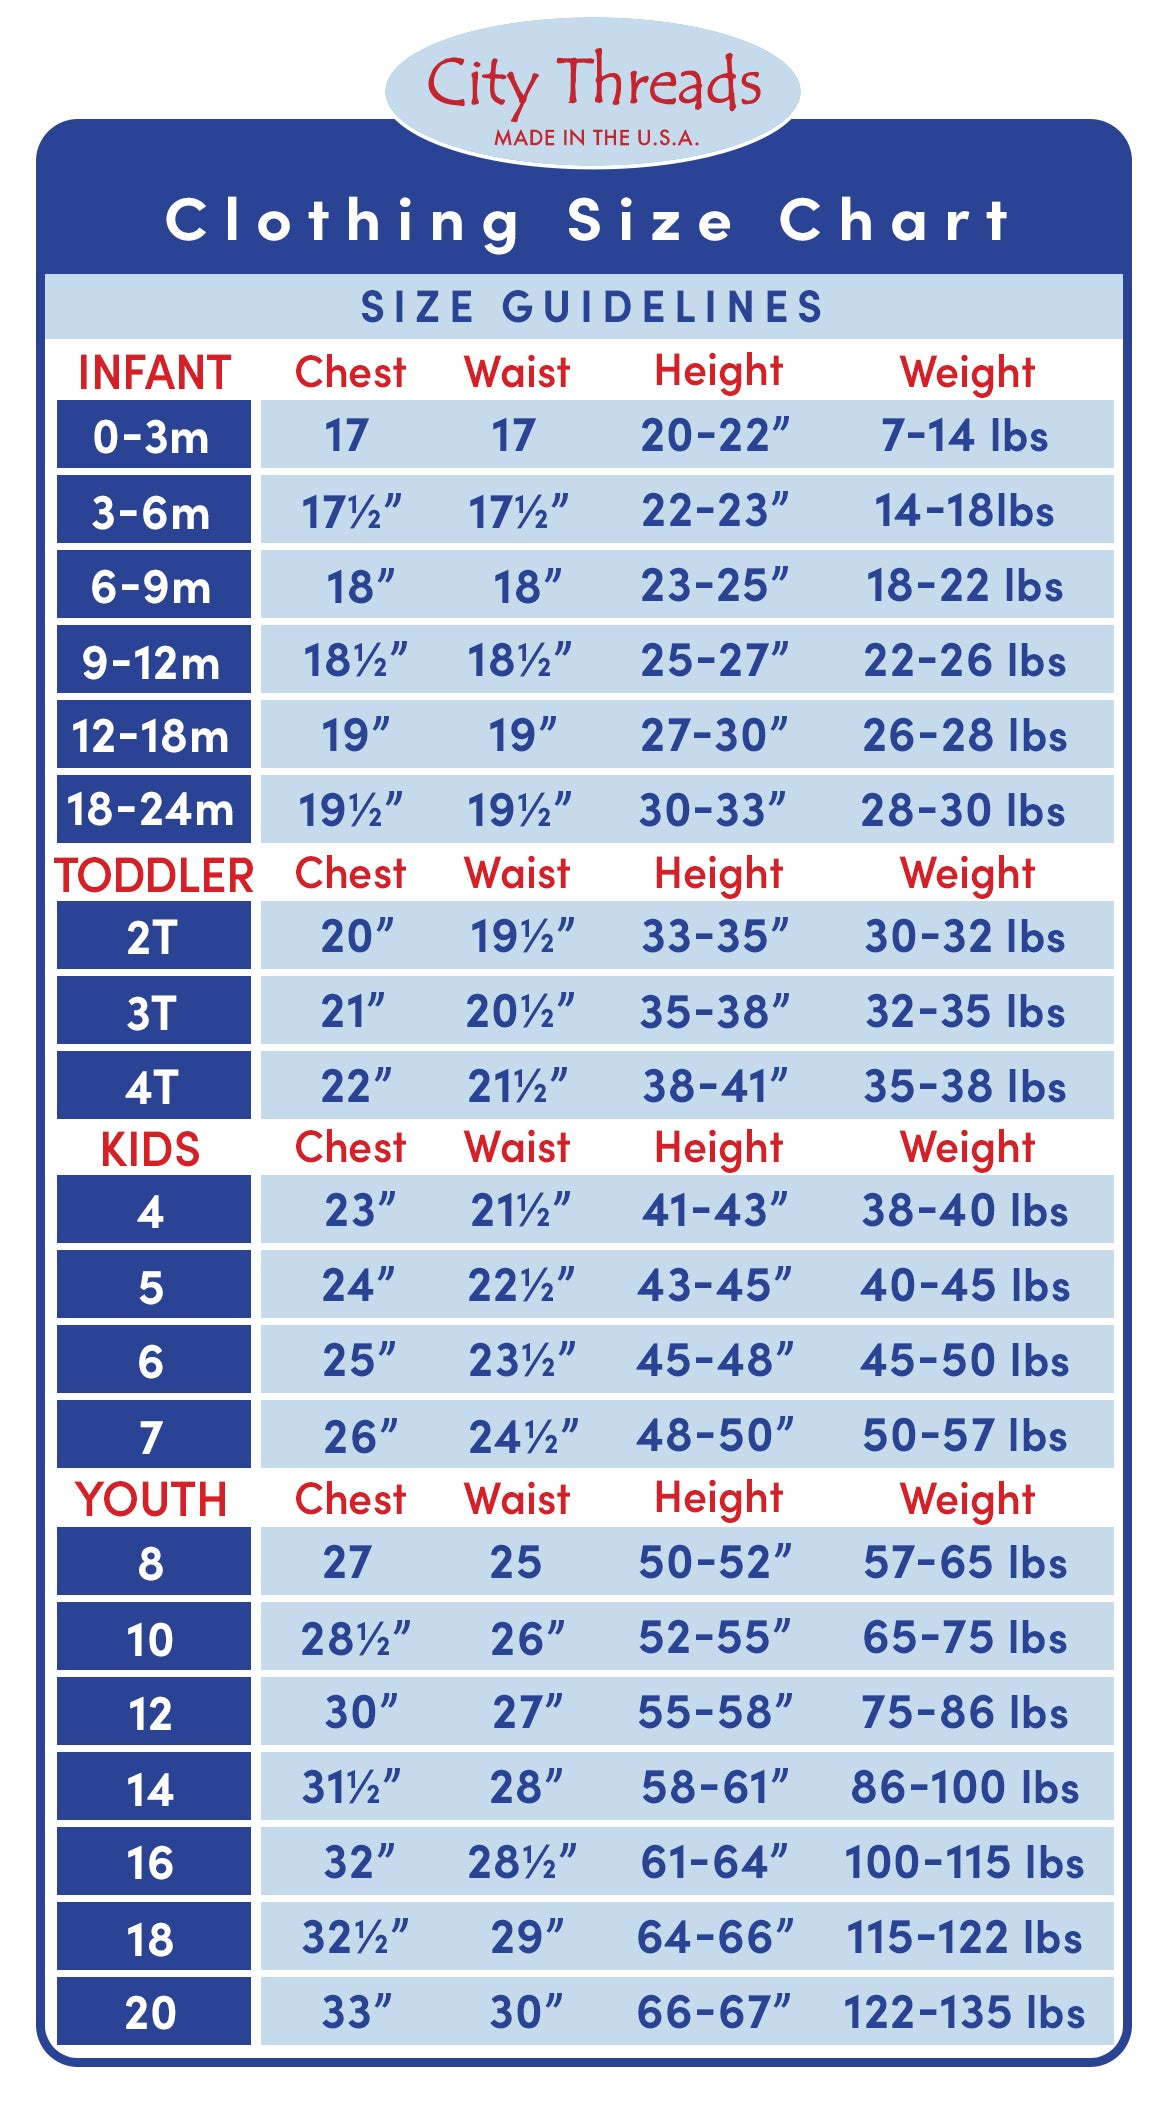 internettet foran person Sizing charts - City Threads USA